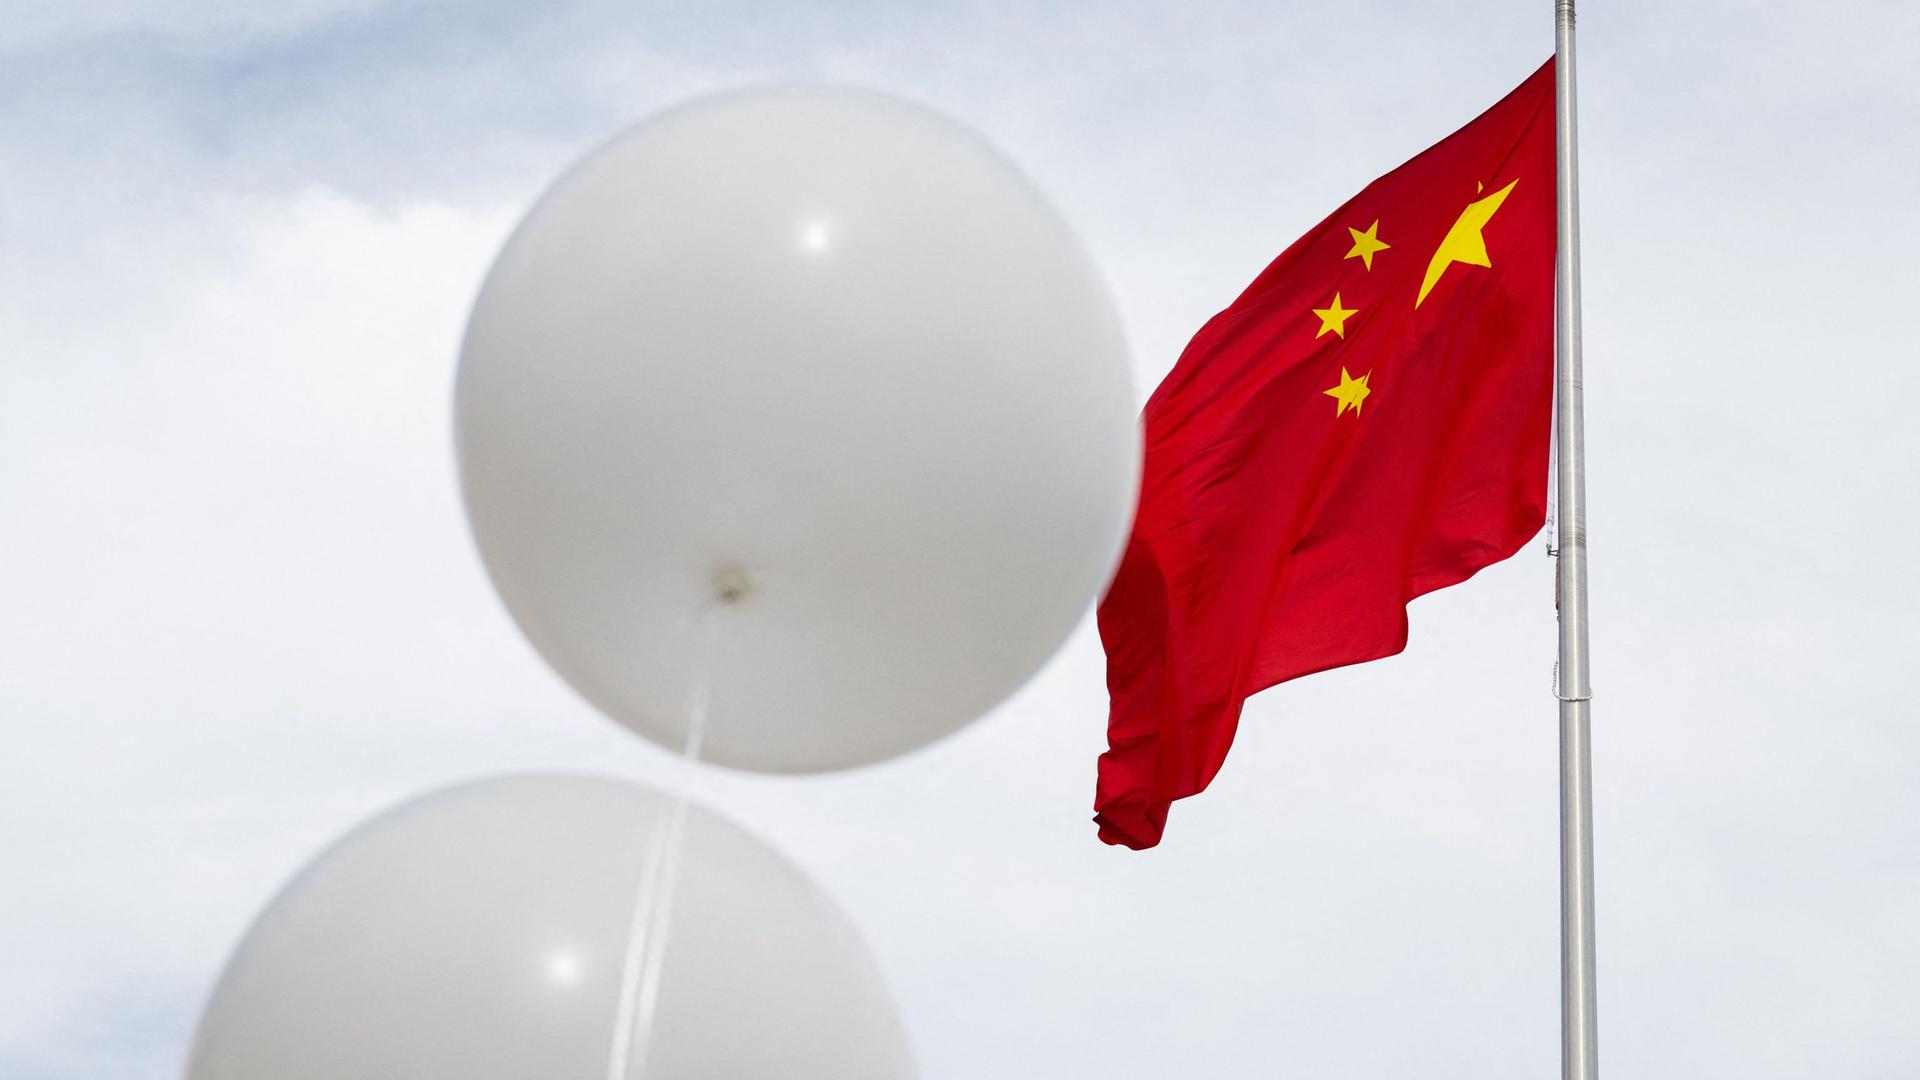 Two white balloons float near the Chinese flag as activist Patrick Mahoney protests against the Chinese government